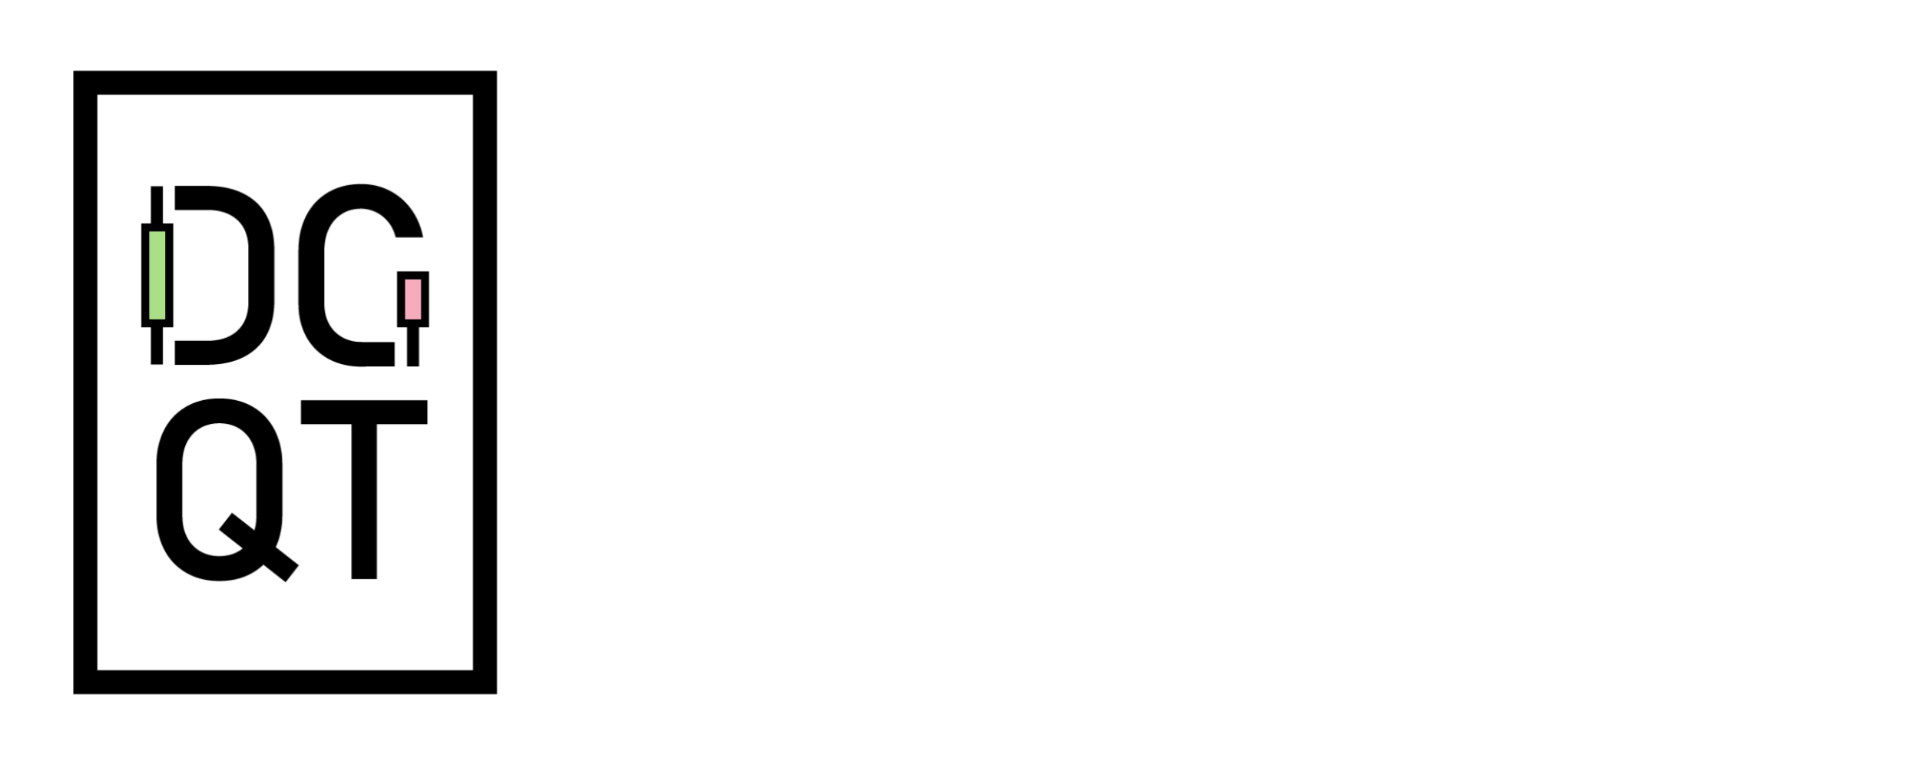 Derivatives Group Quant Trading